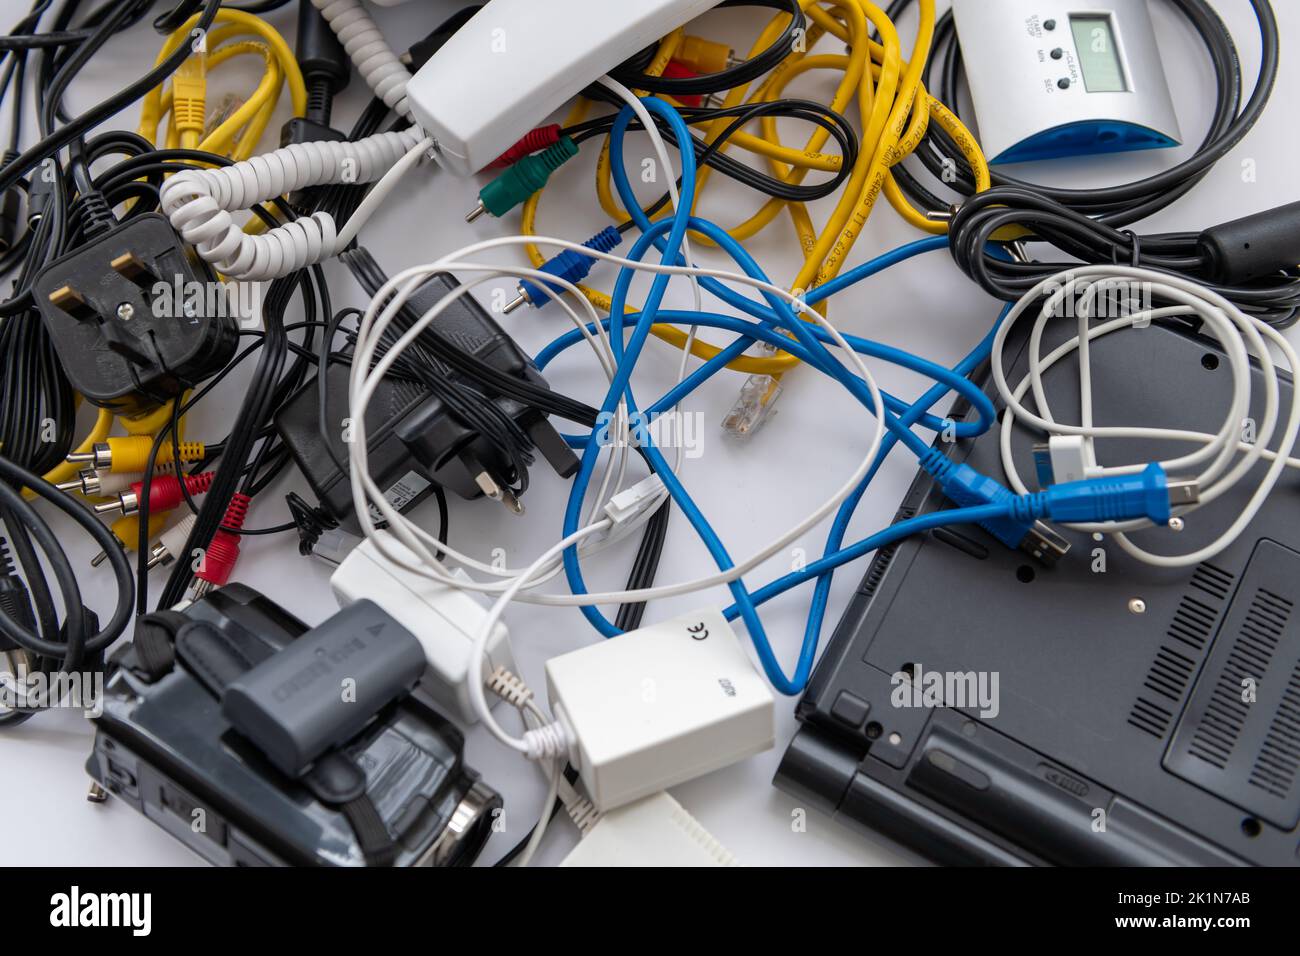 A heap of outdated consumer electronic equipment for waste disposal. Stock Photo